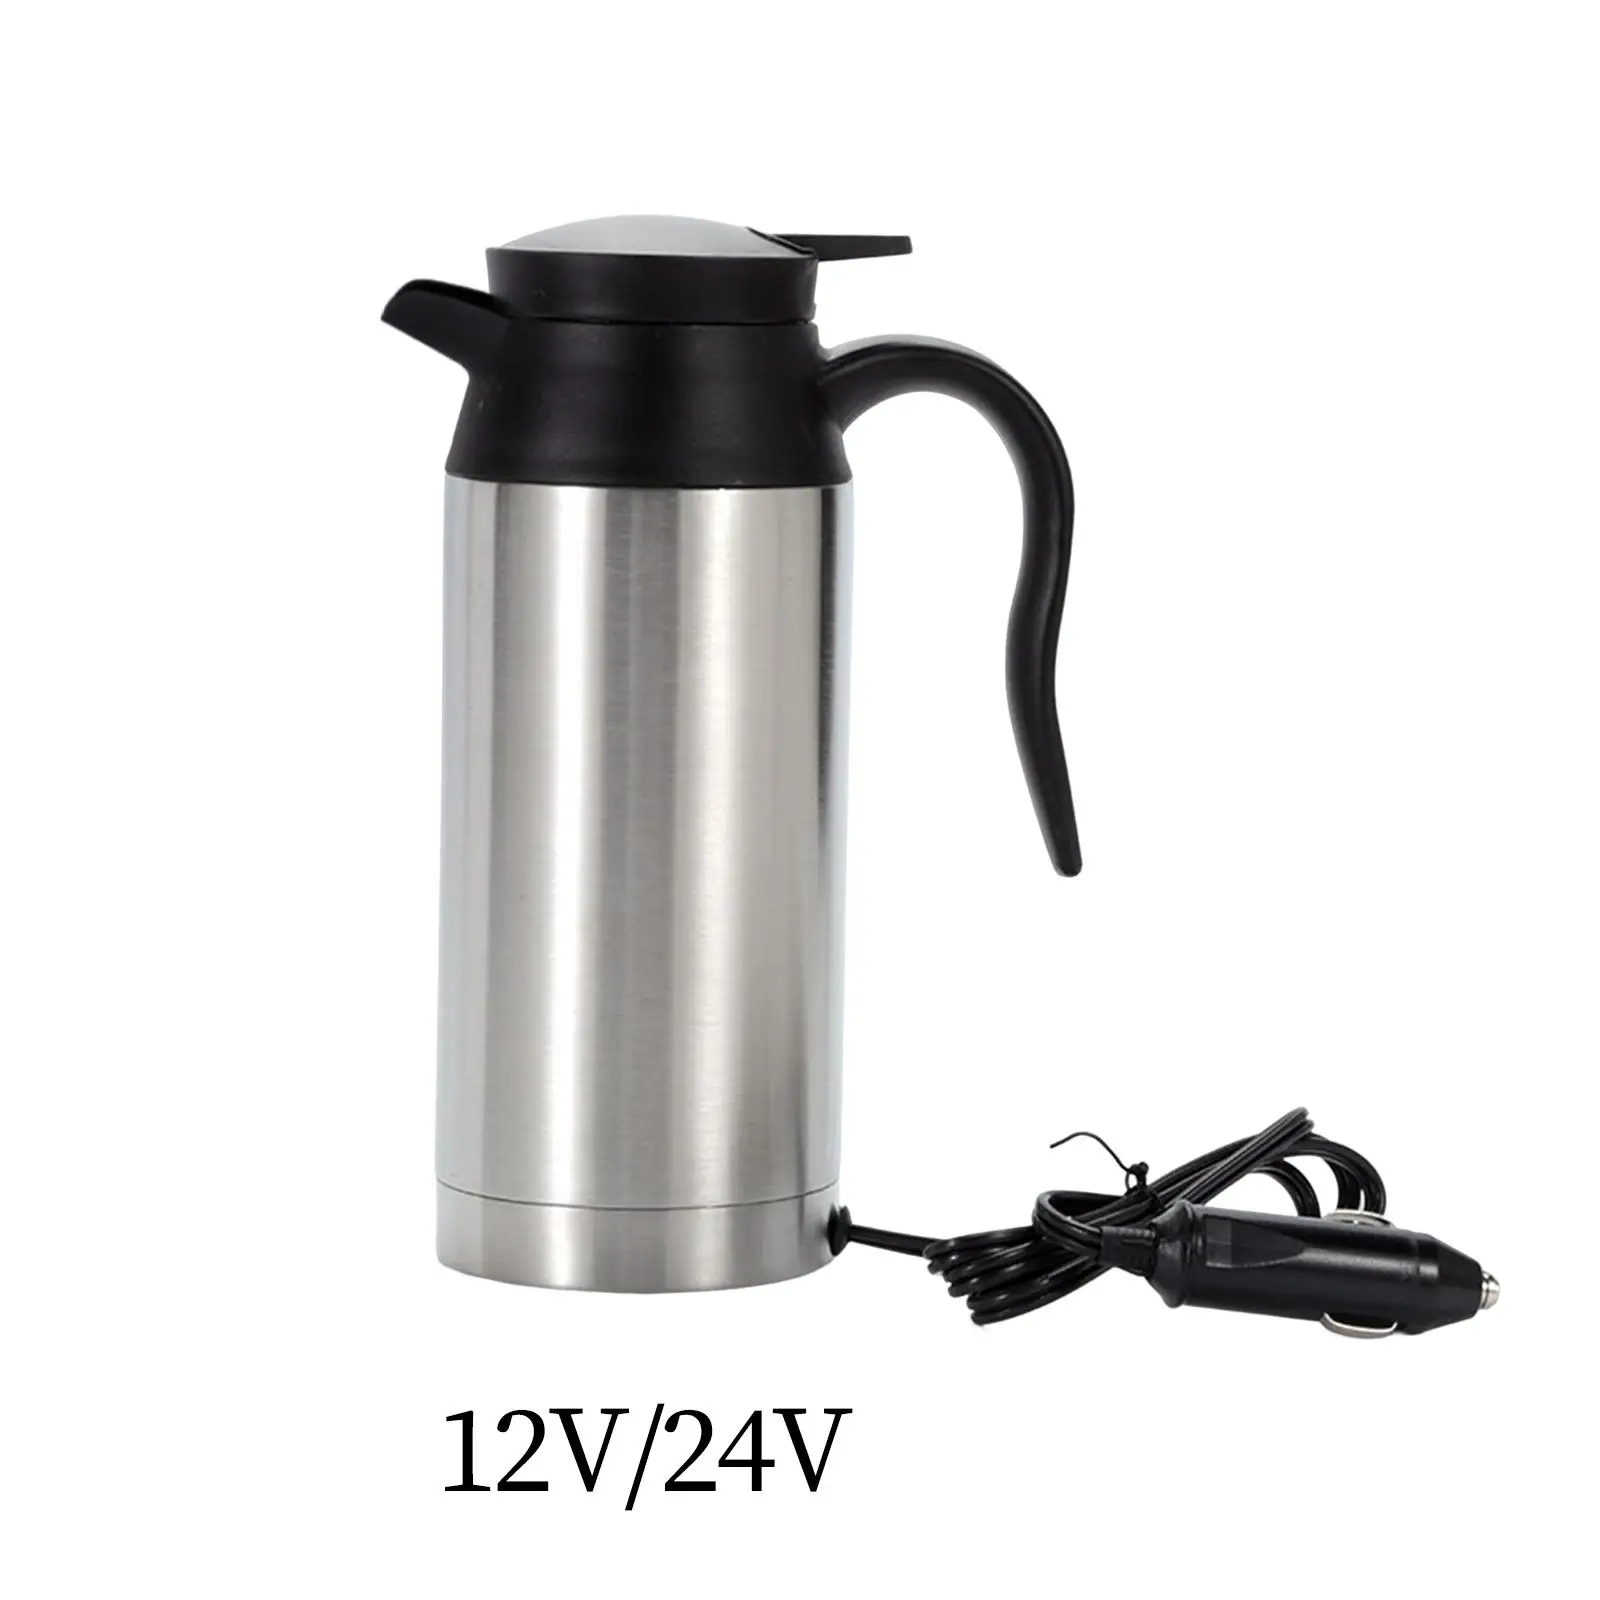 750ml Stainless Steel Electric Car Kettle Heating Cup Easily Clean Fits Most Car